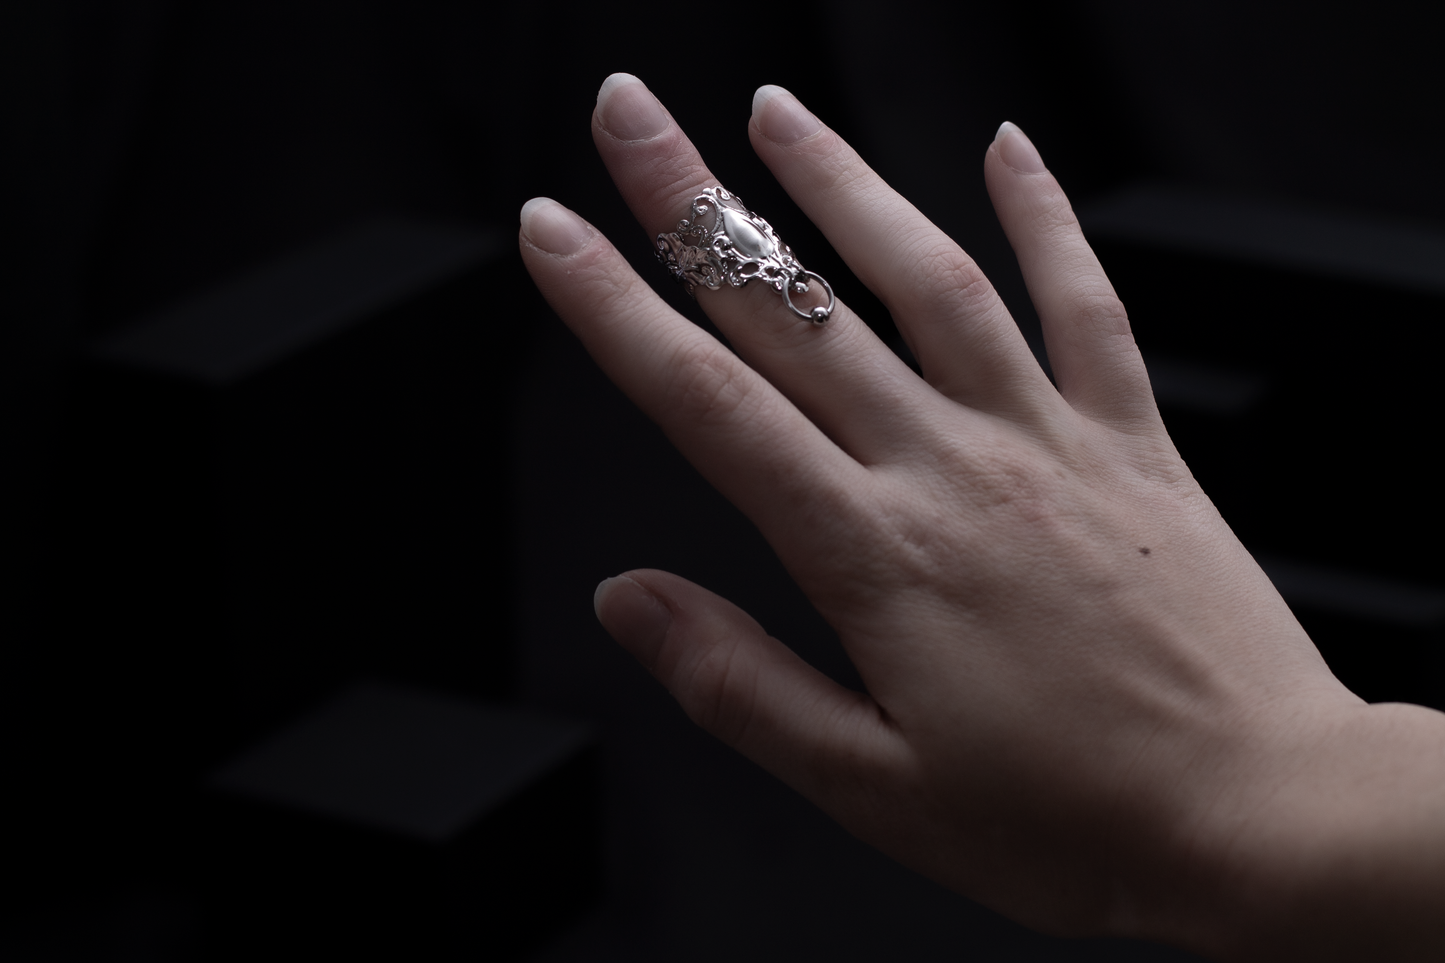 Myril Jewels presents a sophisticated midi ring, embodying neo-gothic charm with its delicate filigree and bold design. This piece, perfect for gothic-chic and whimsigoth enthusiasts, adds an enigmatic touch to everyday wear and is an ideal goth girlfriend gift or a unique find for festival jewelry collectors.